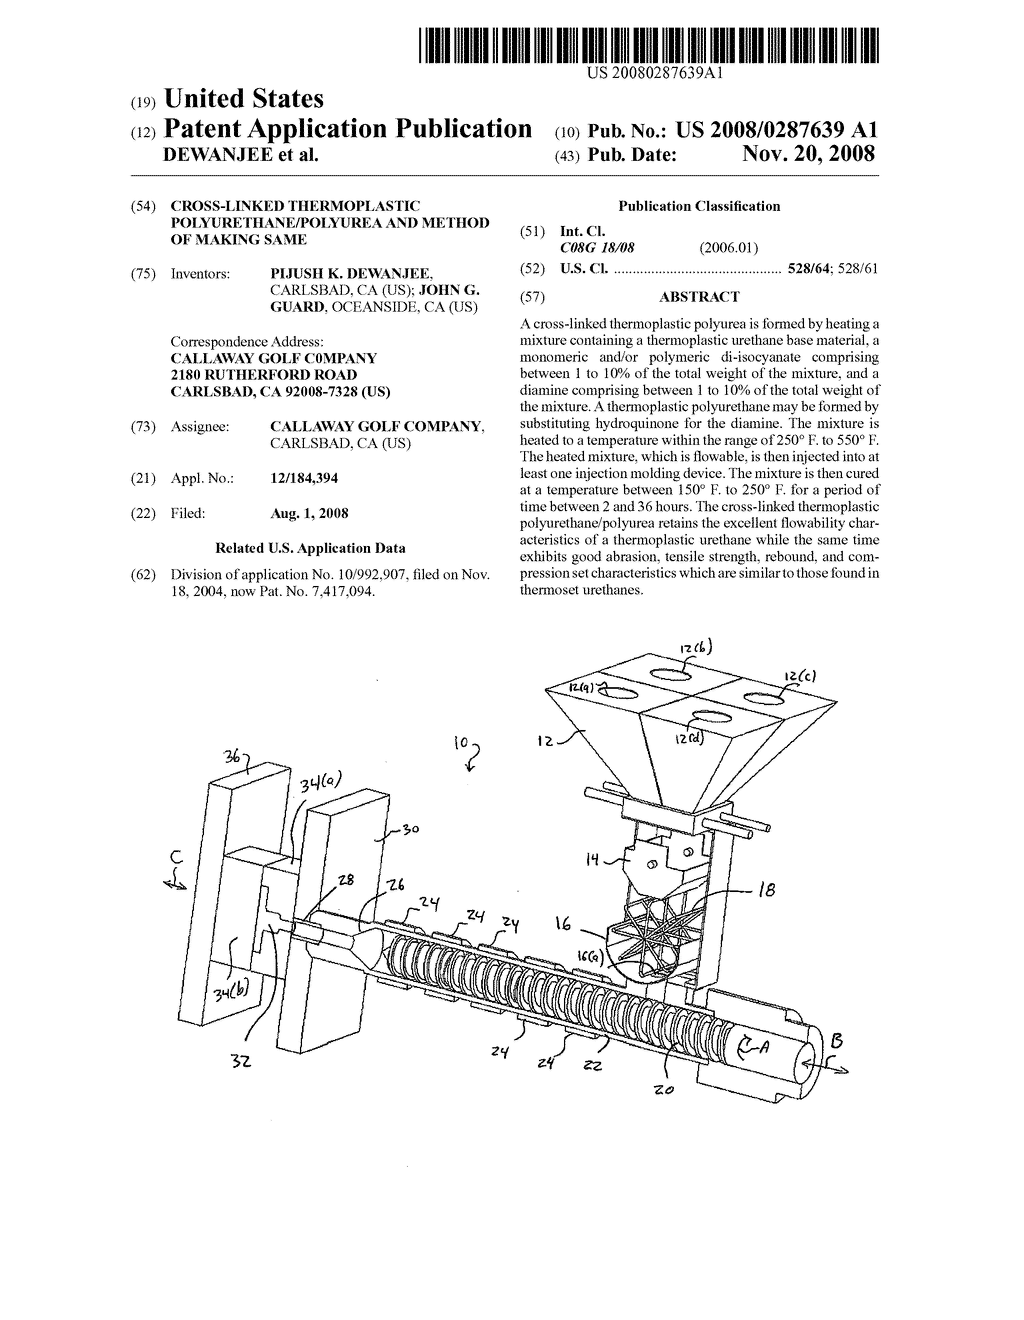 CROSS-LINKED THERMOPLASTIC POLYURETHANE/POLYUREA AND METHOD OF MAKING SAME - diagram, schematic, and image 01